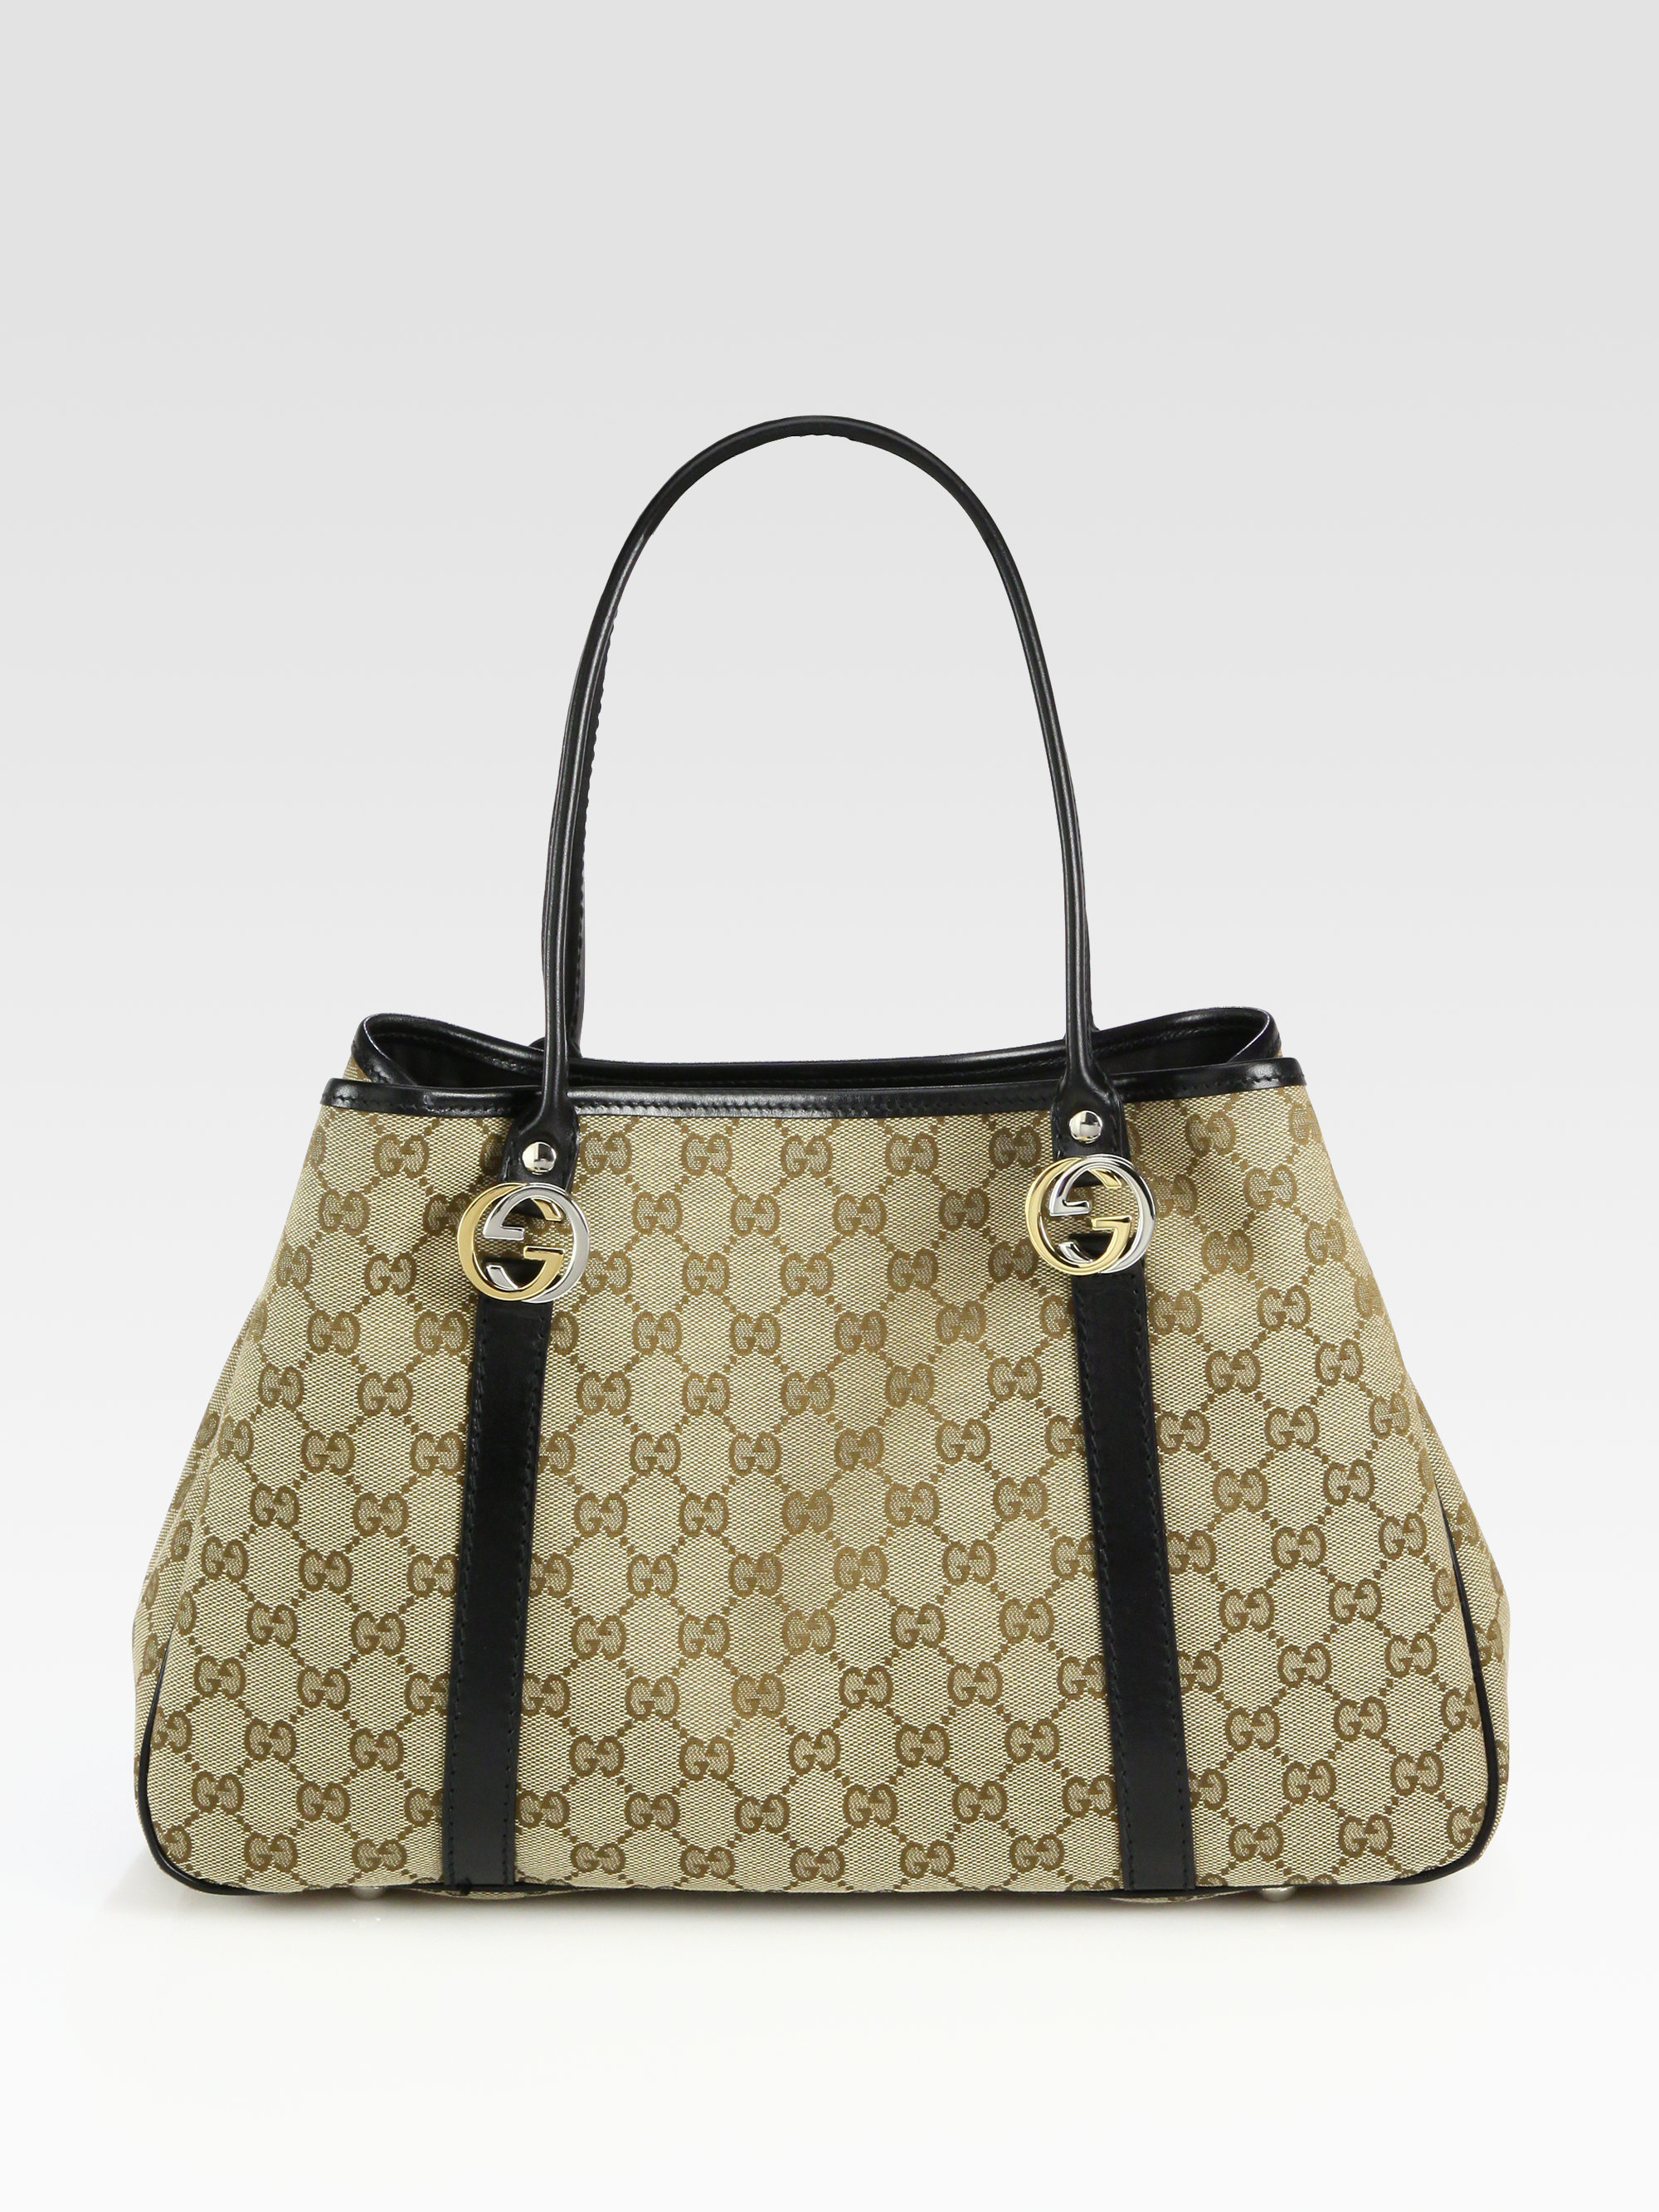 Gucci White and Beige Gg Canvas and Leather Tote Bag in White | Lyst